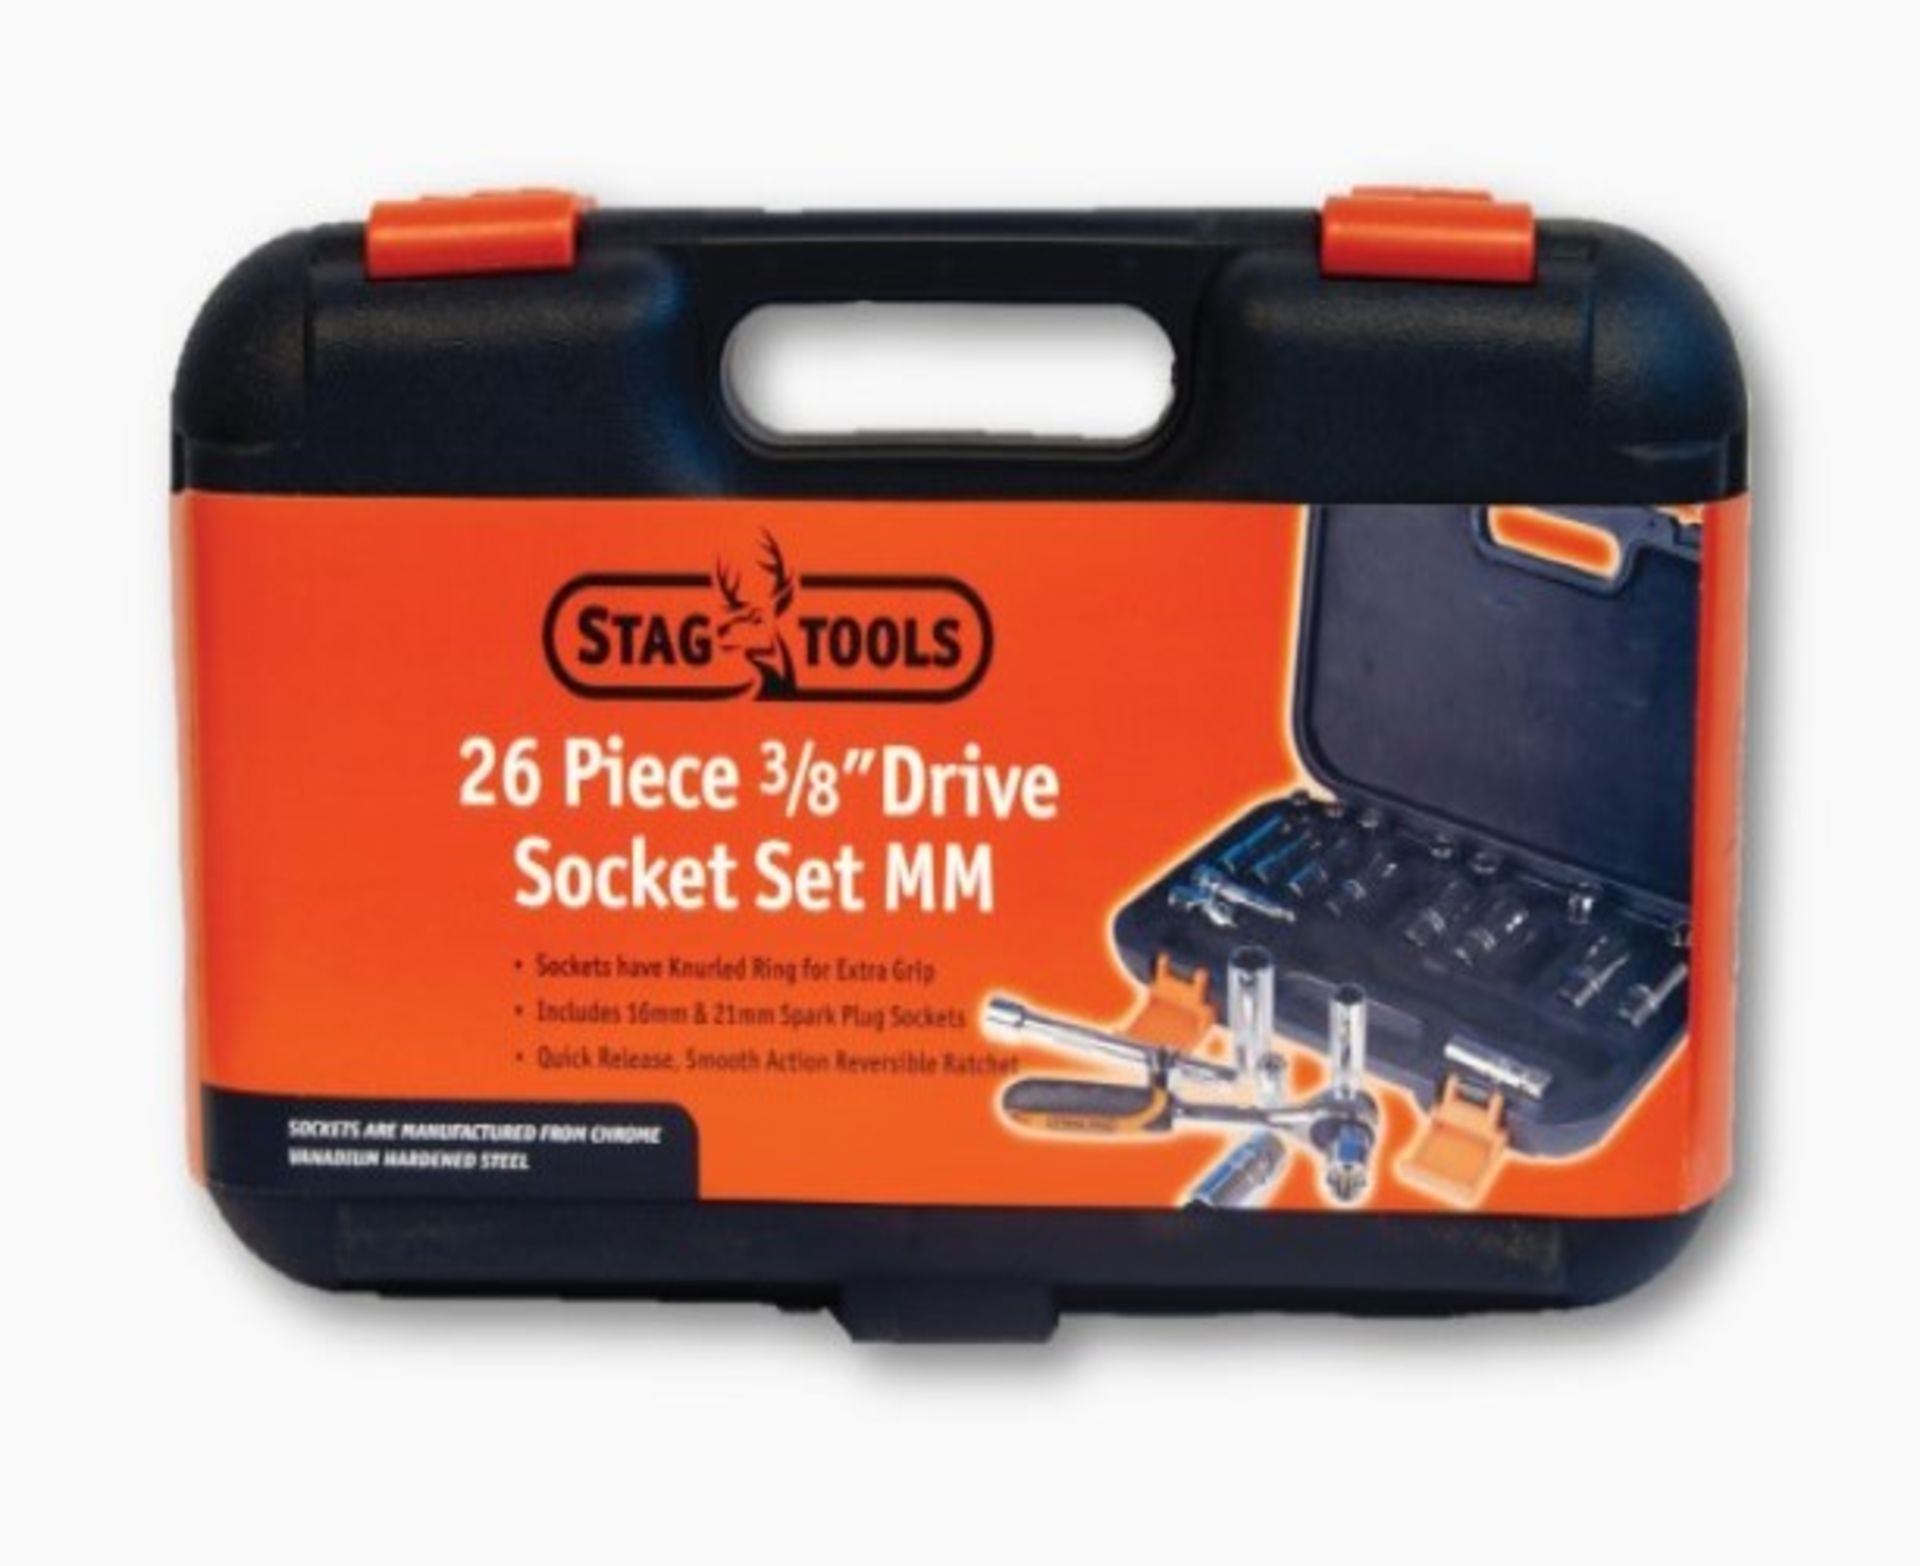 Brand New Stag Tools 26 Piece 3/8 Drive Socket Sets